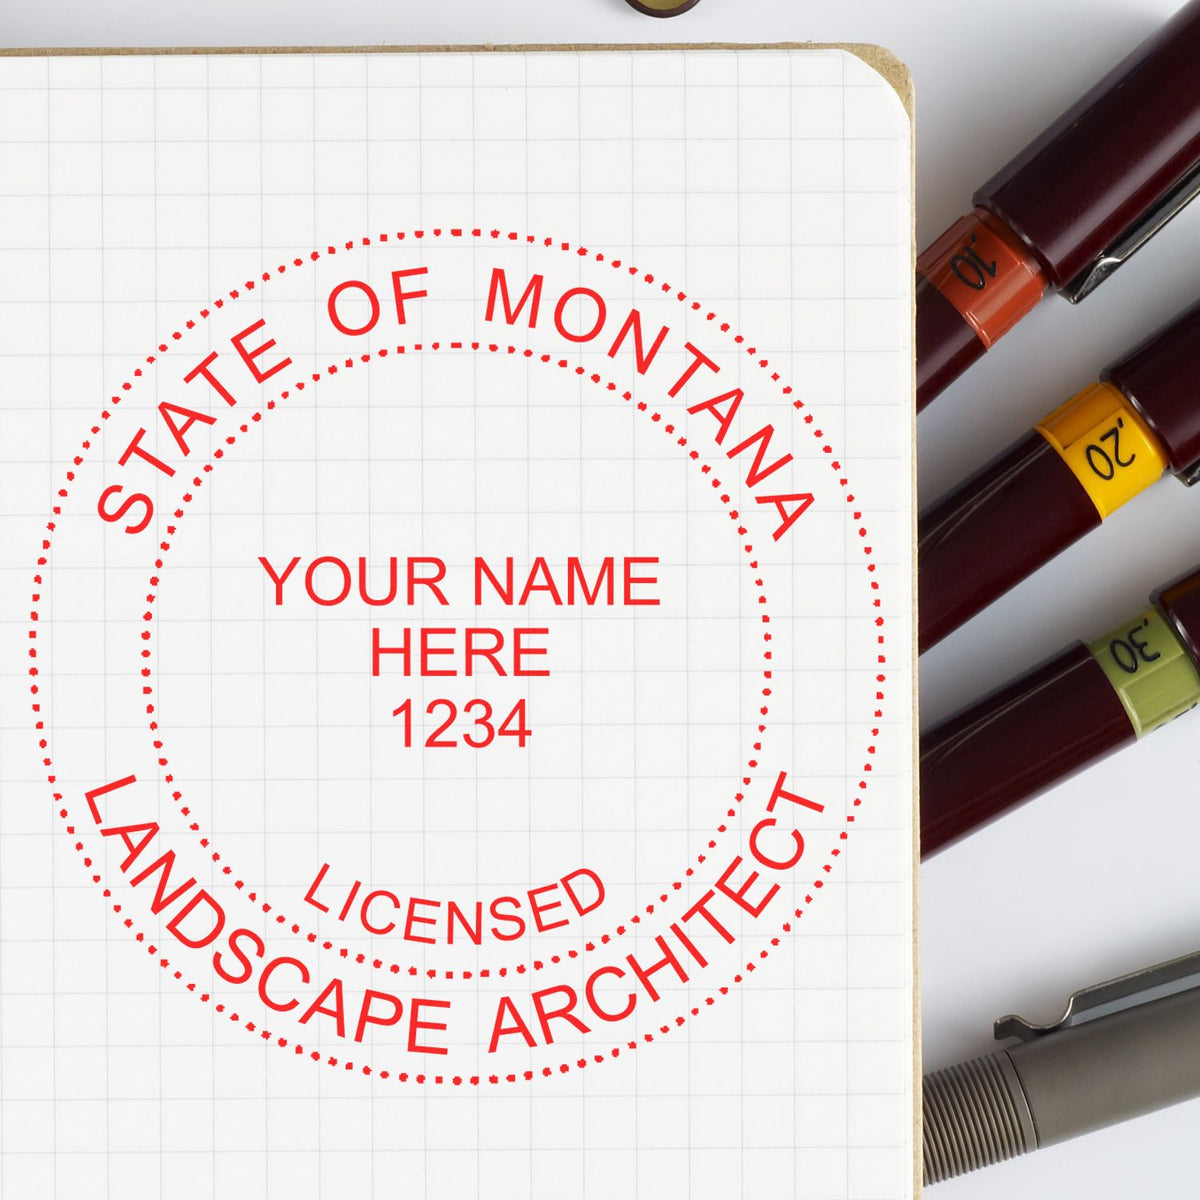 A stamped impression of the Slim Pre-Inked Montana Landscape Architect Seal Stamp in this stylish lifestyle photo, setting the tone for a unique and personalized product.